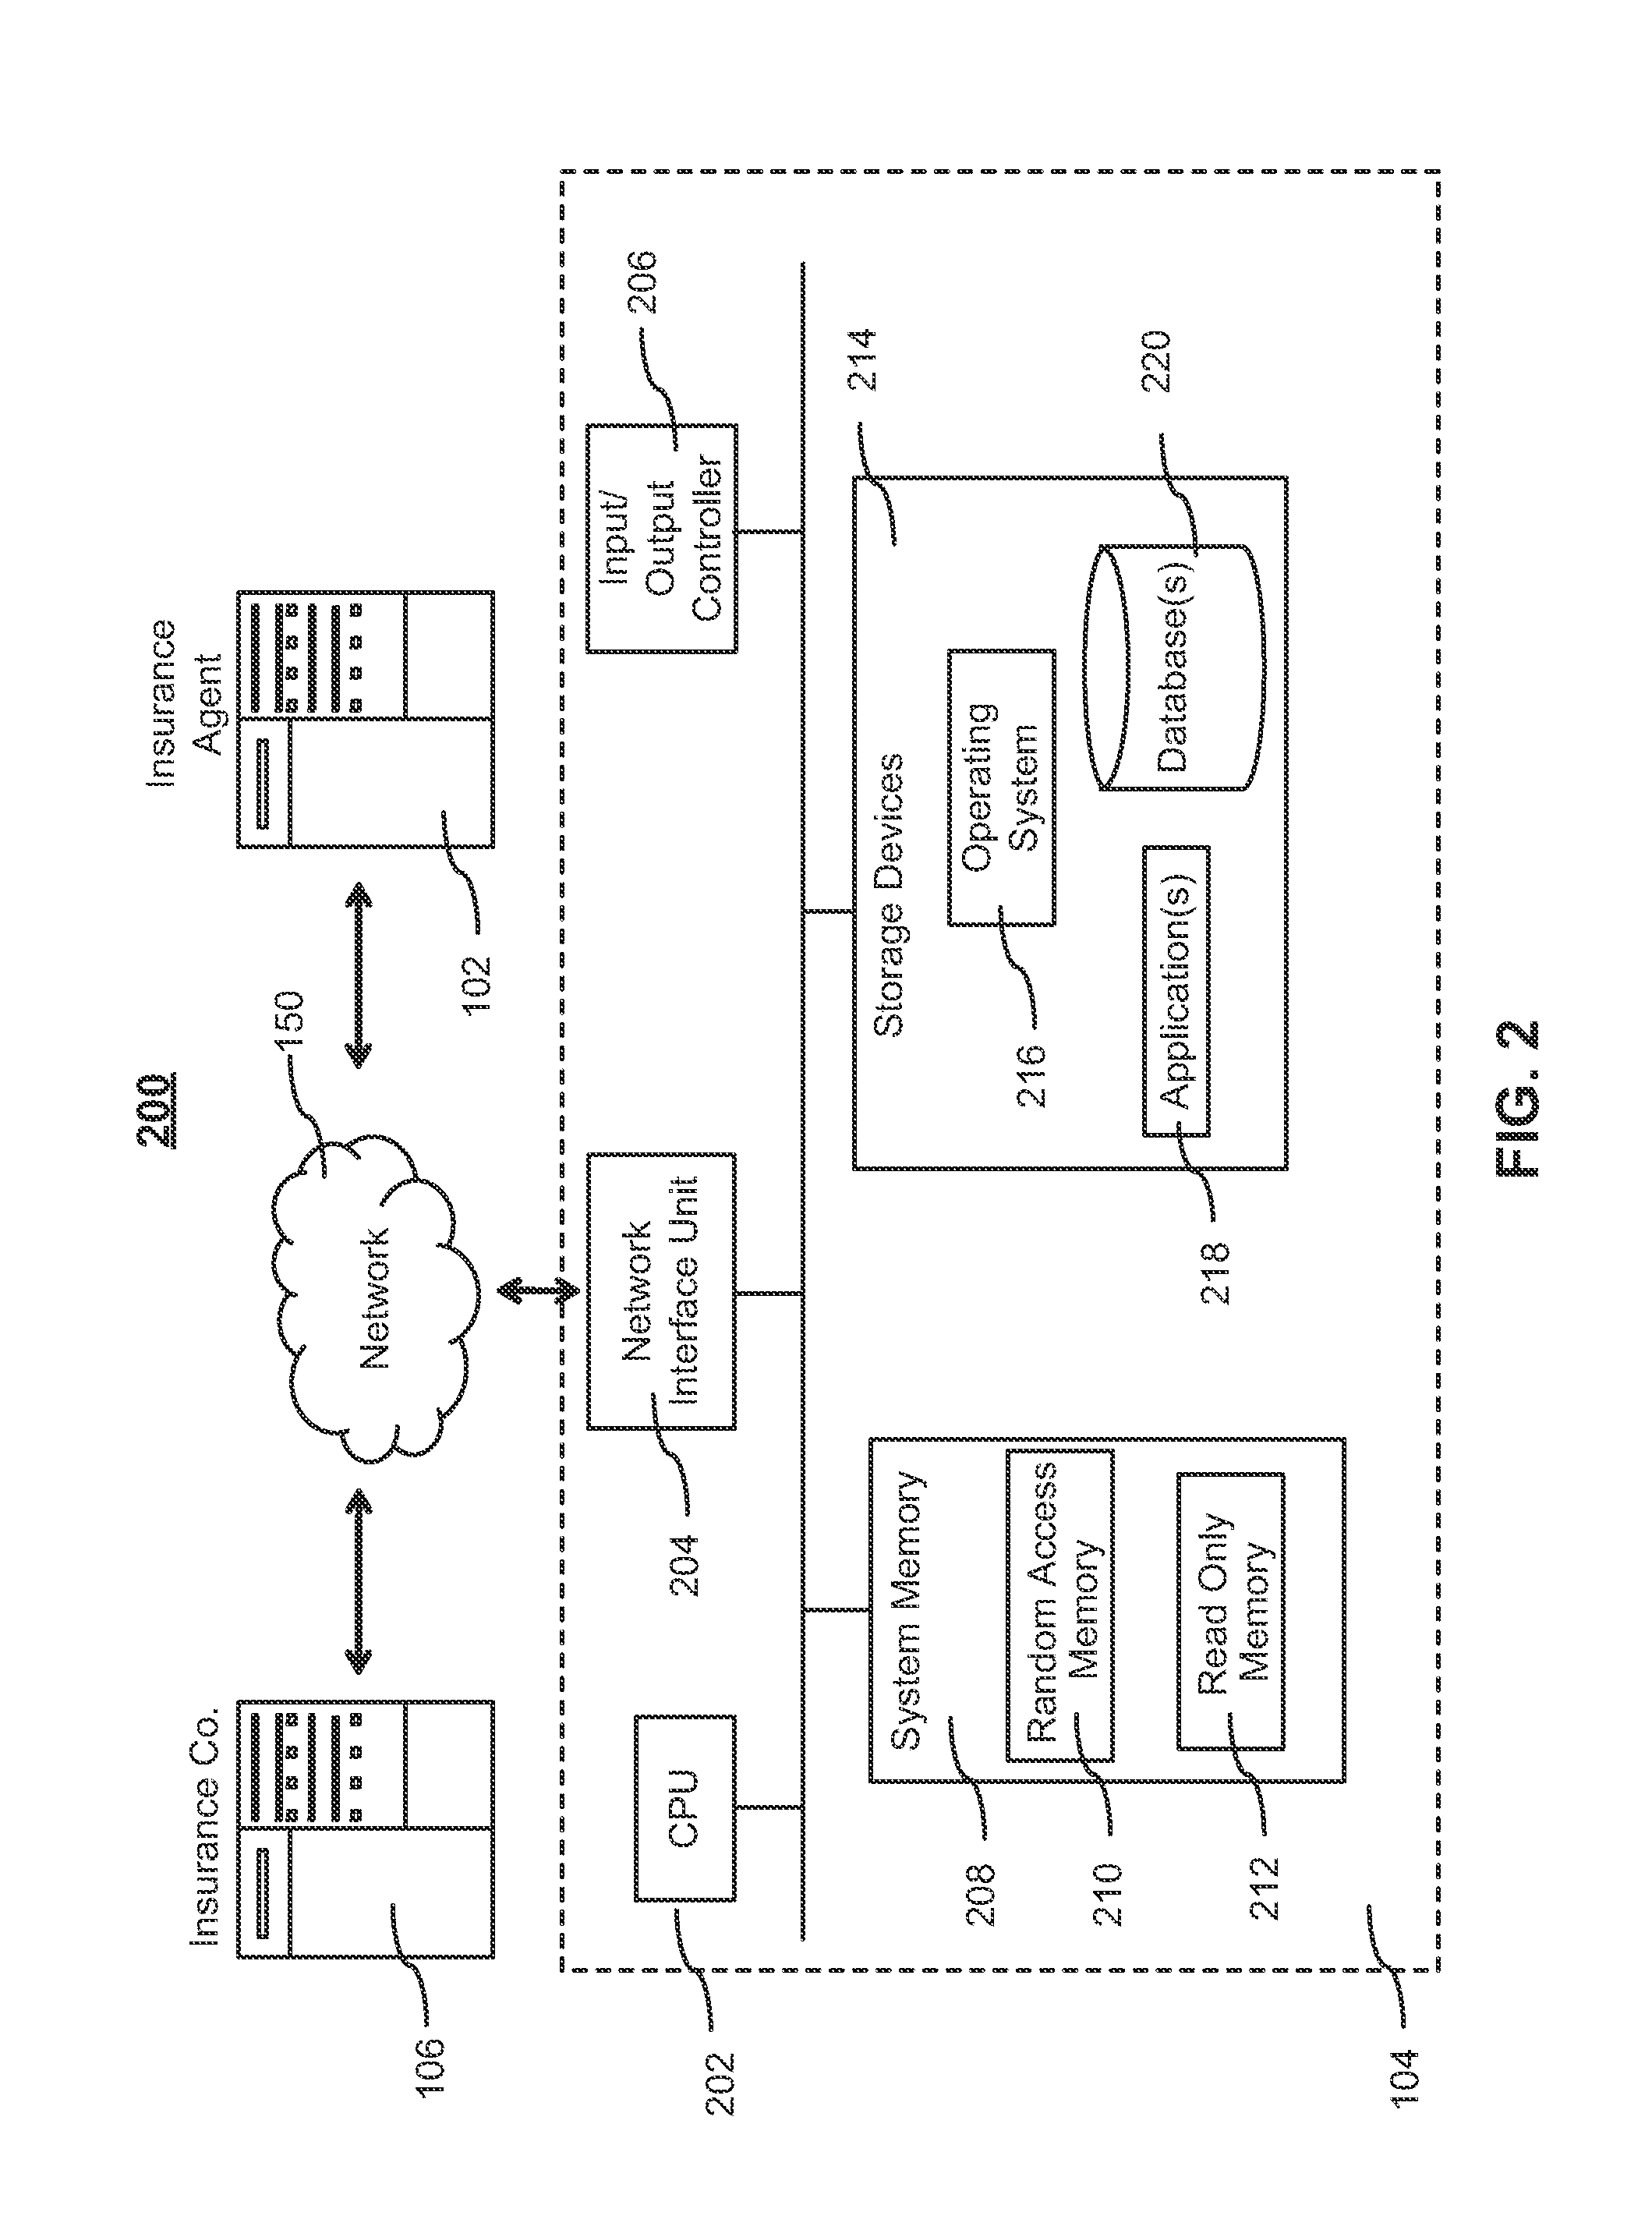 System and method for web-based industrial classification